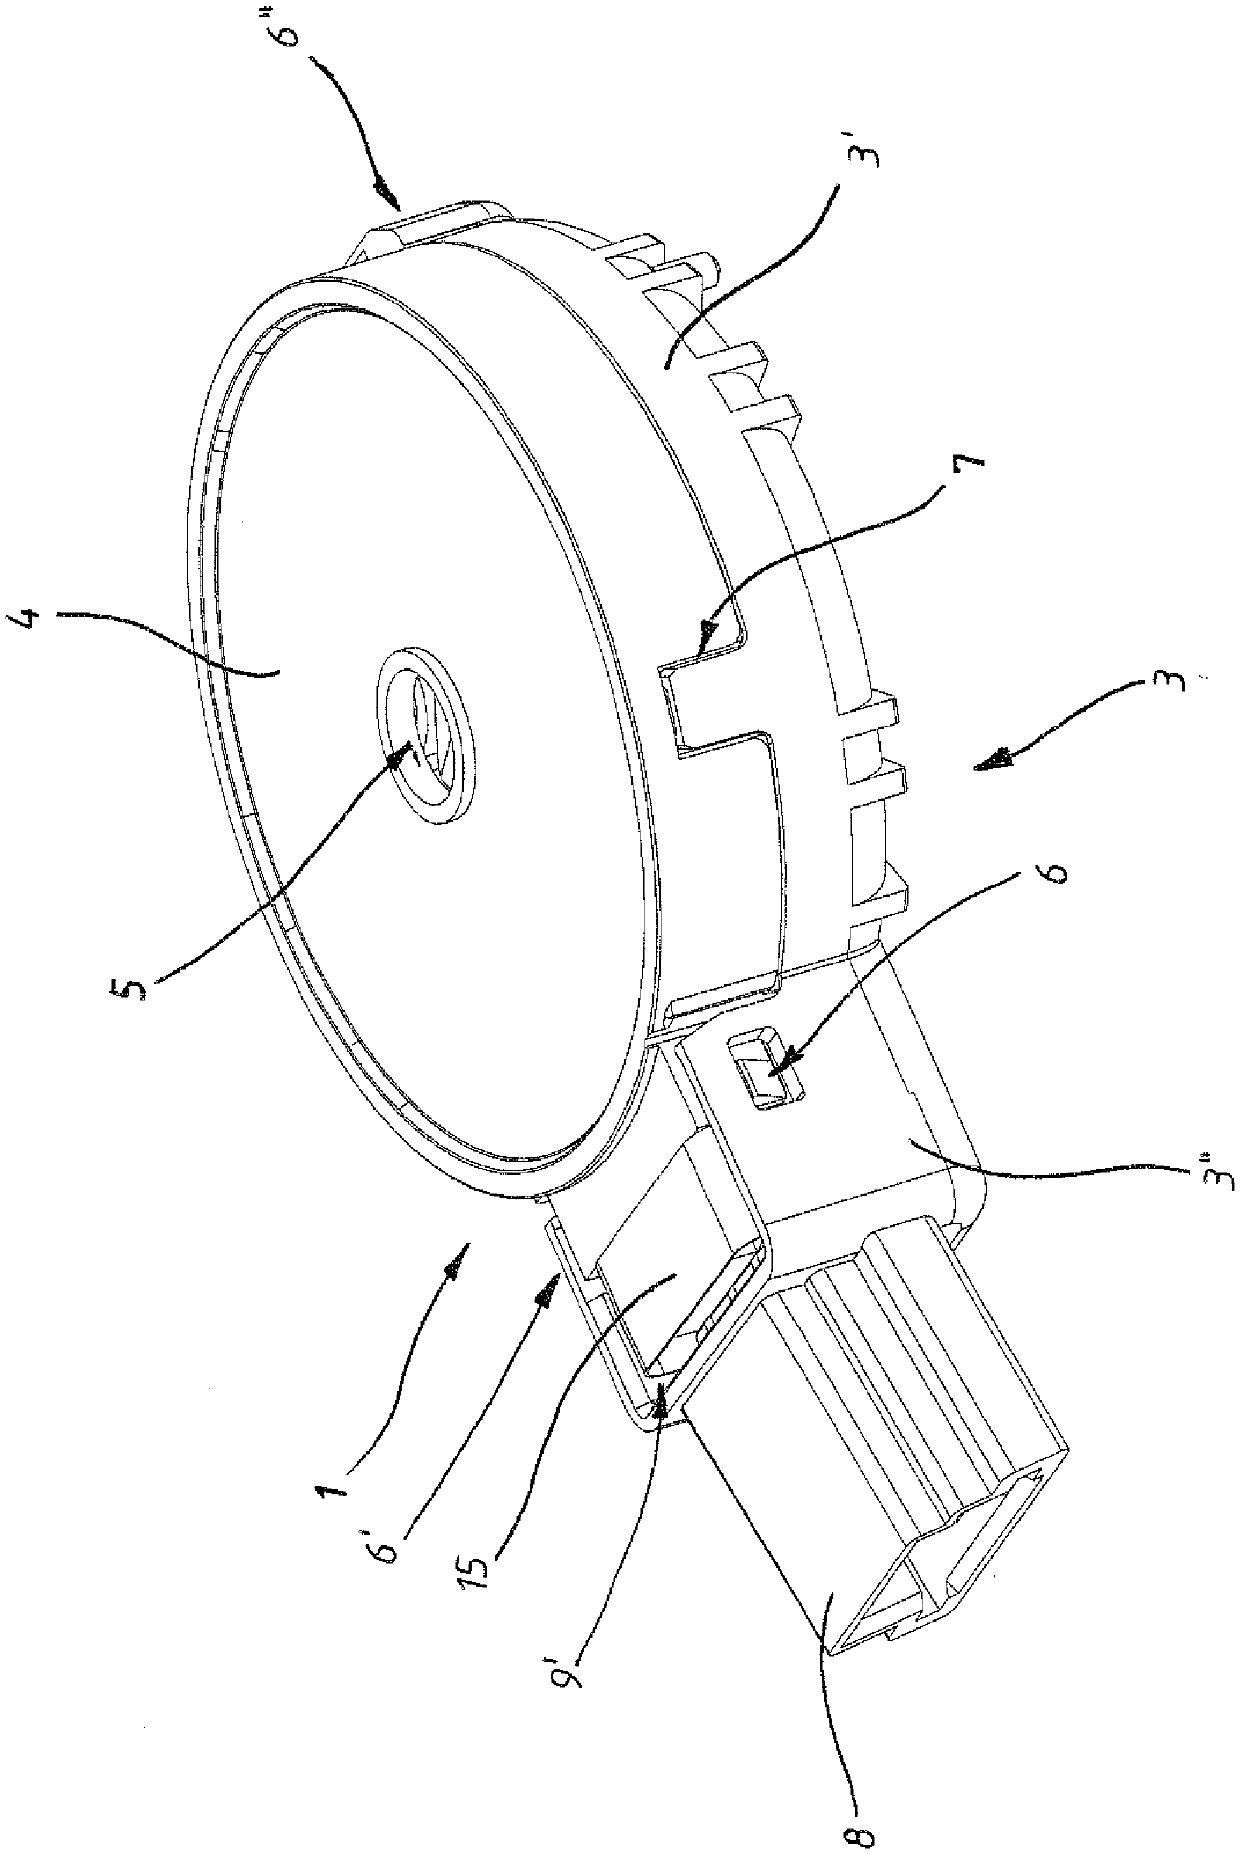 Sensor device for detecting environmental conditions